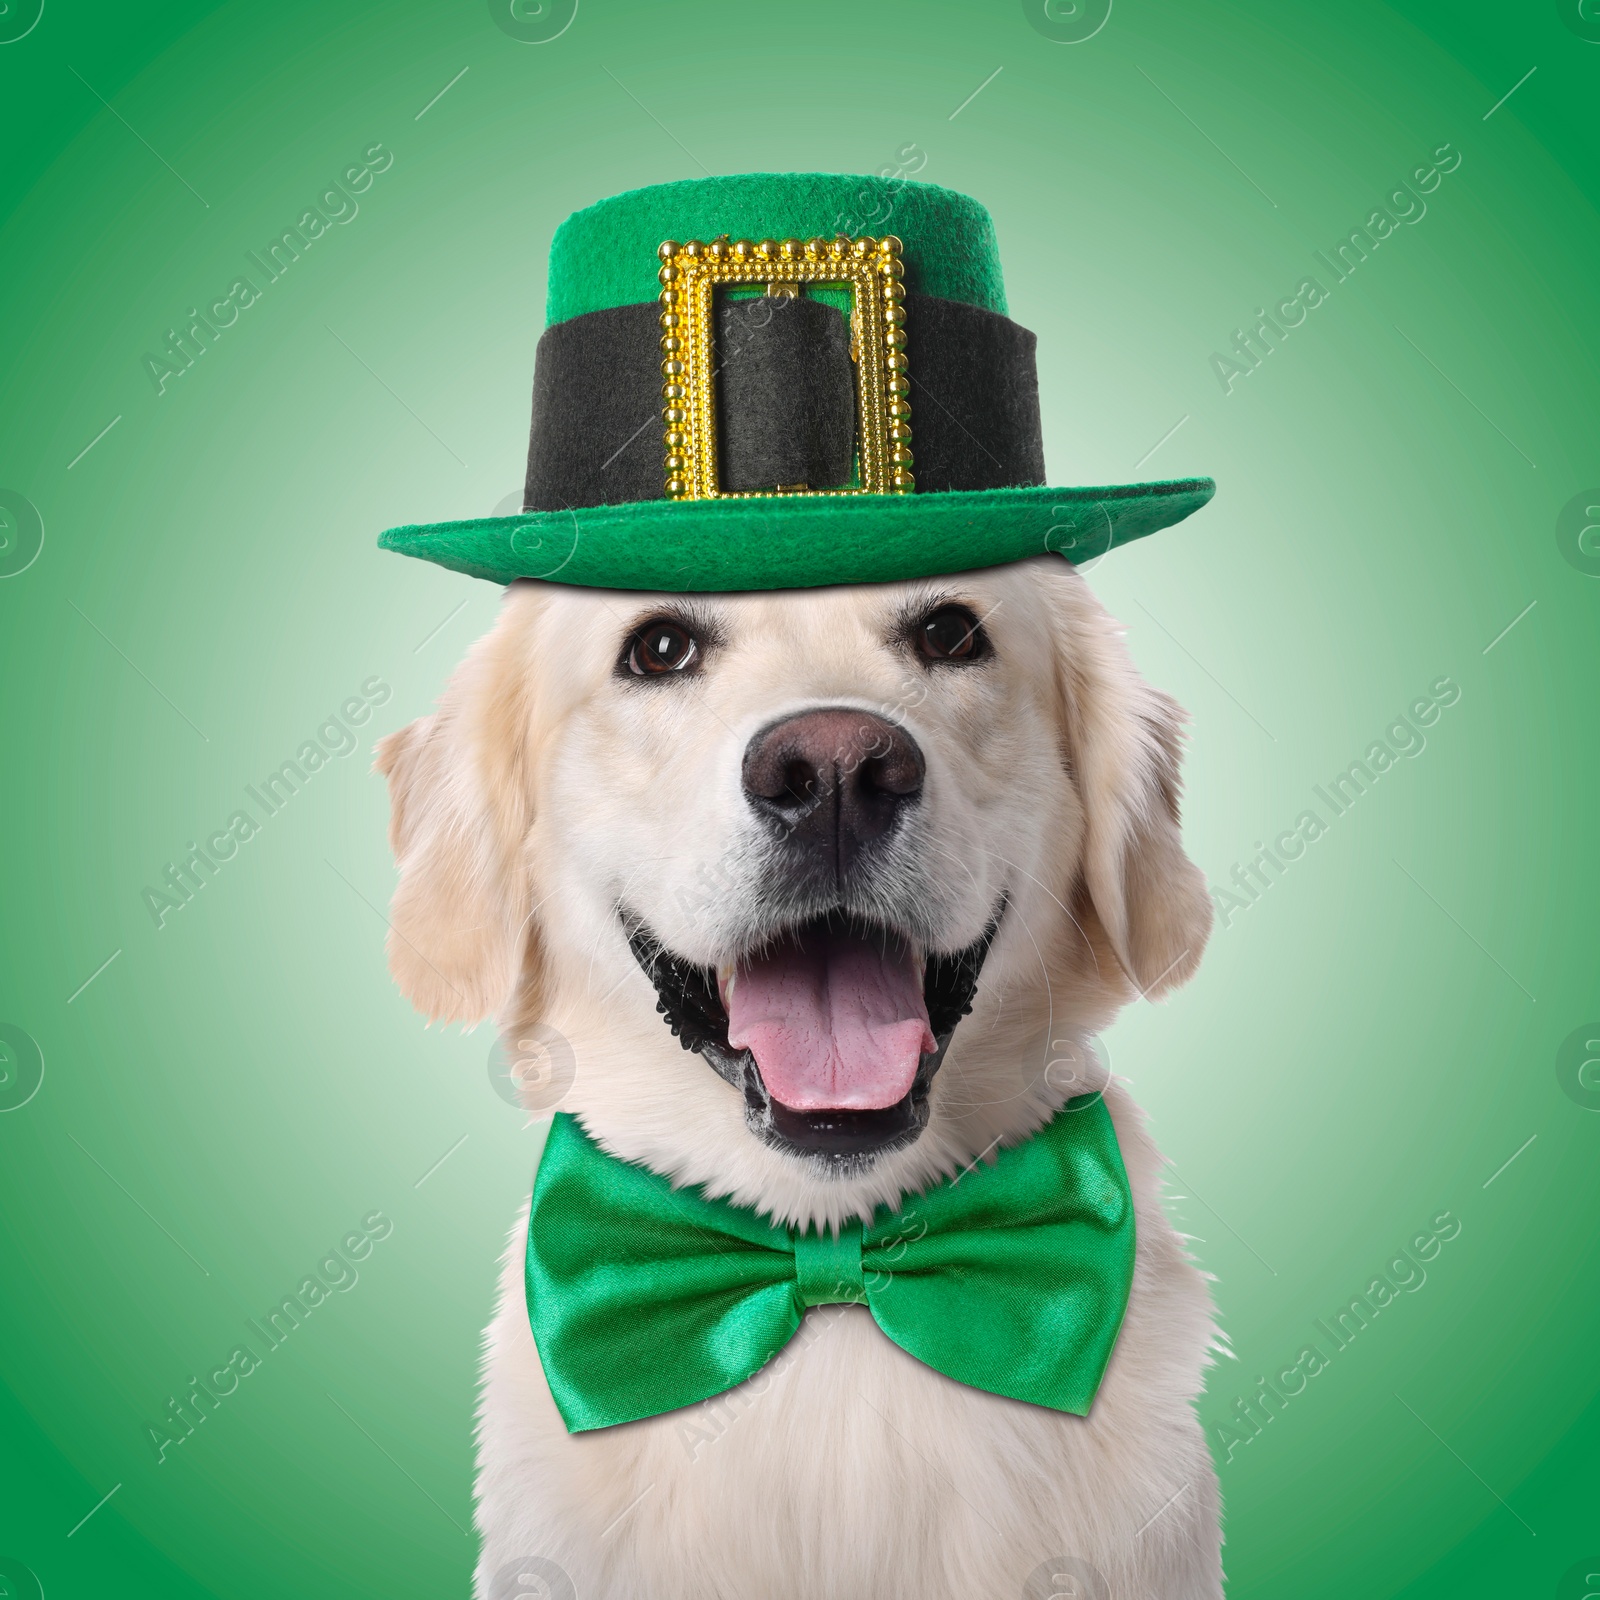 Image of St. Patrick's day celebration. Cute Golden Retriever dog with leprechaun hat and bow tie on green background